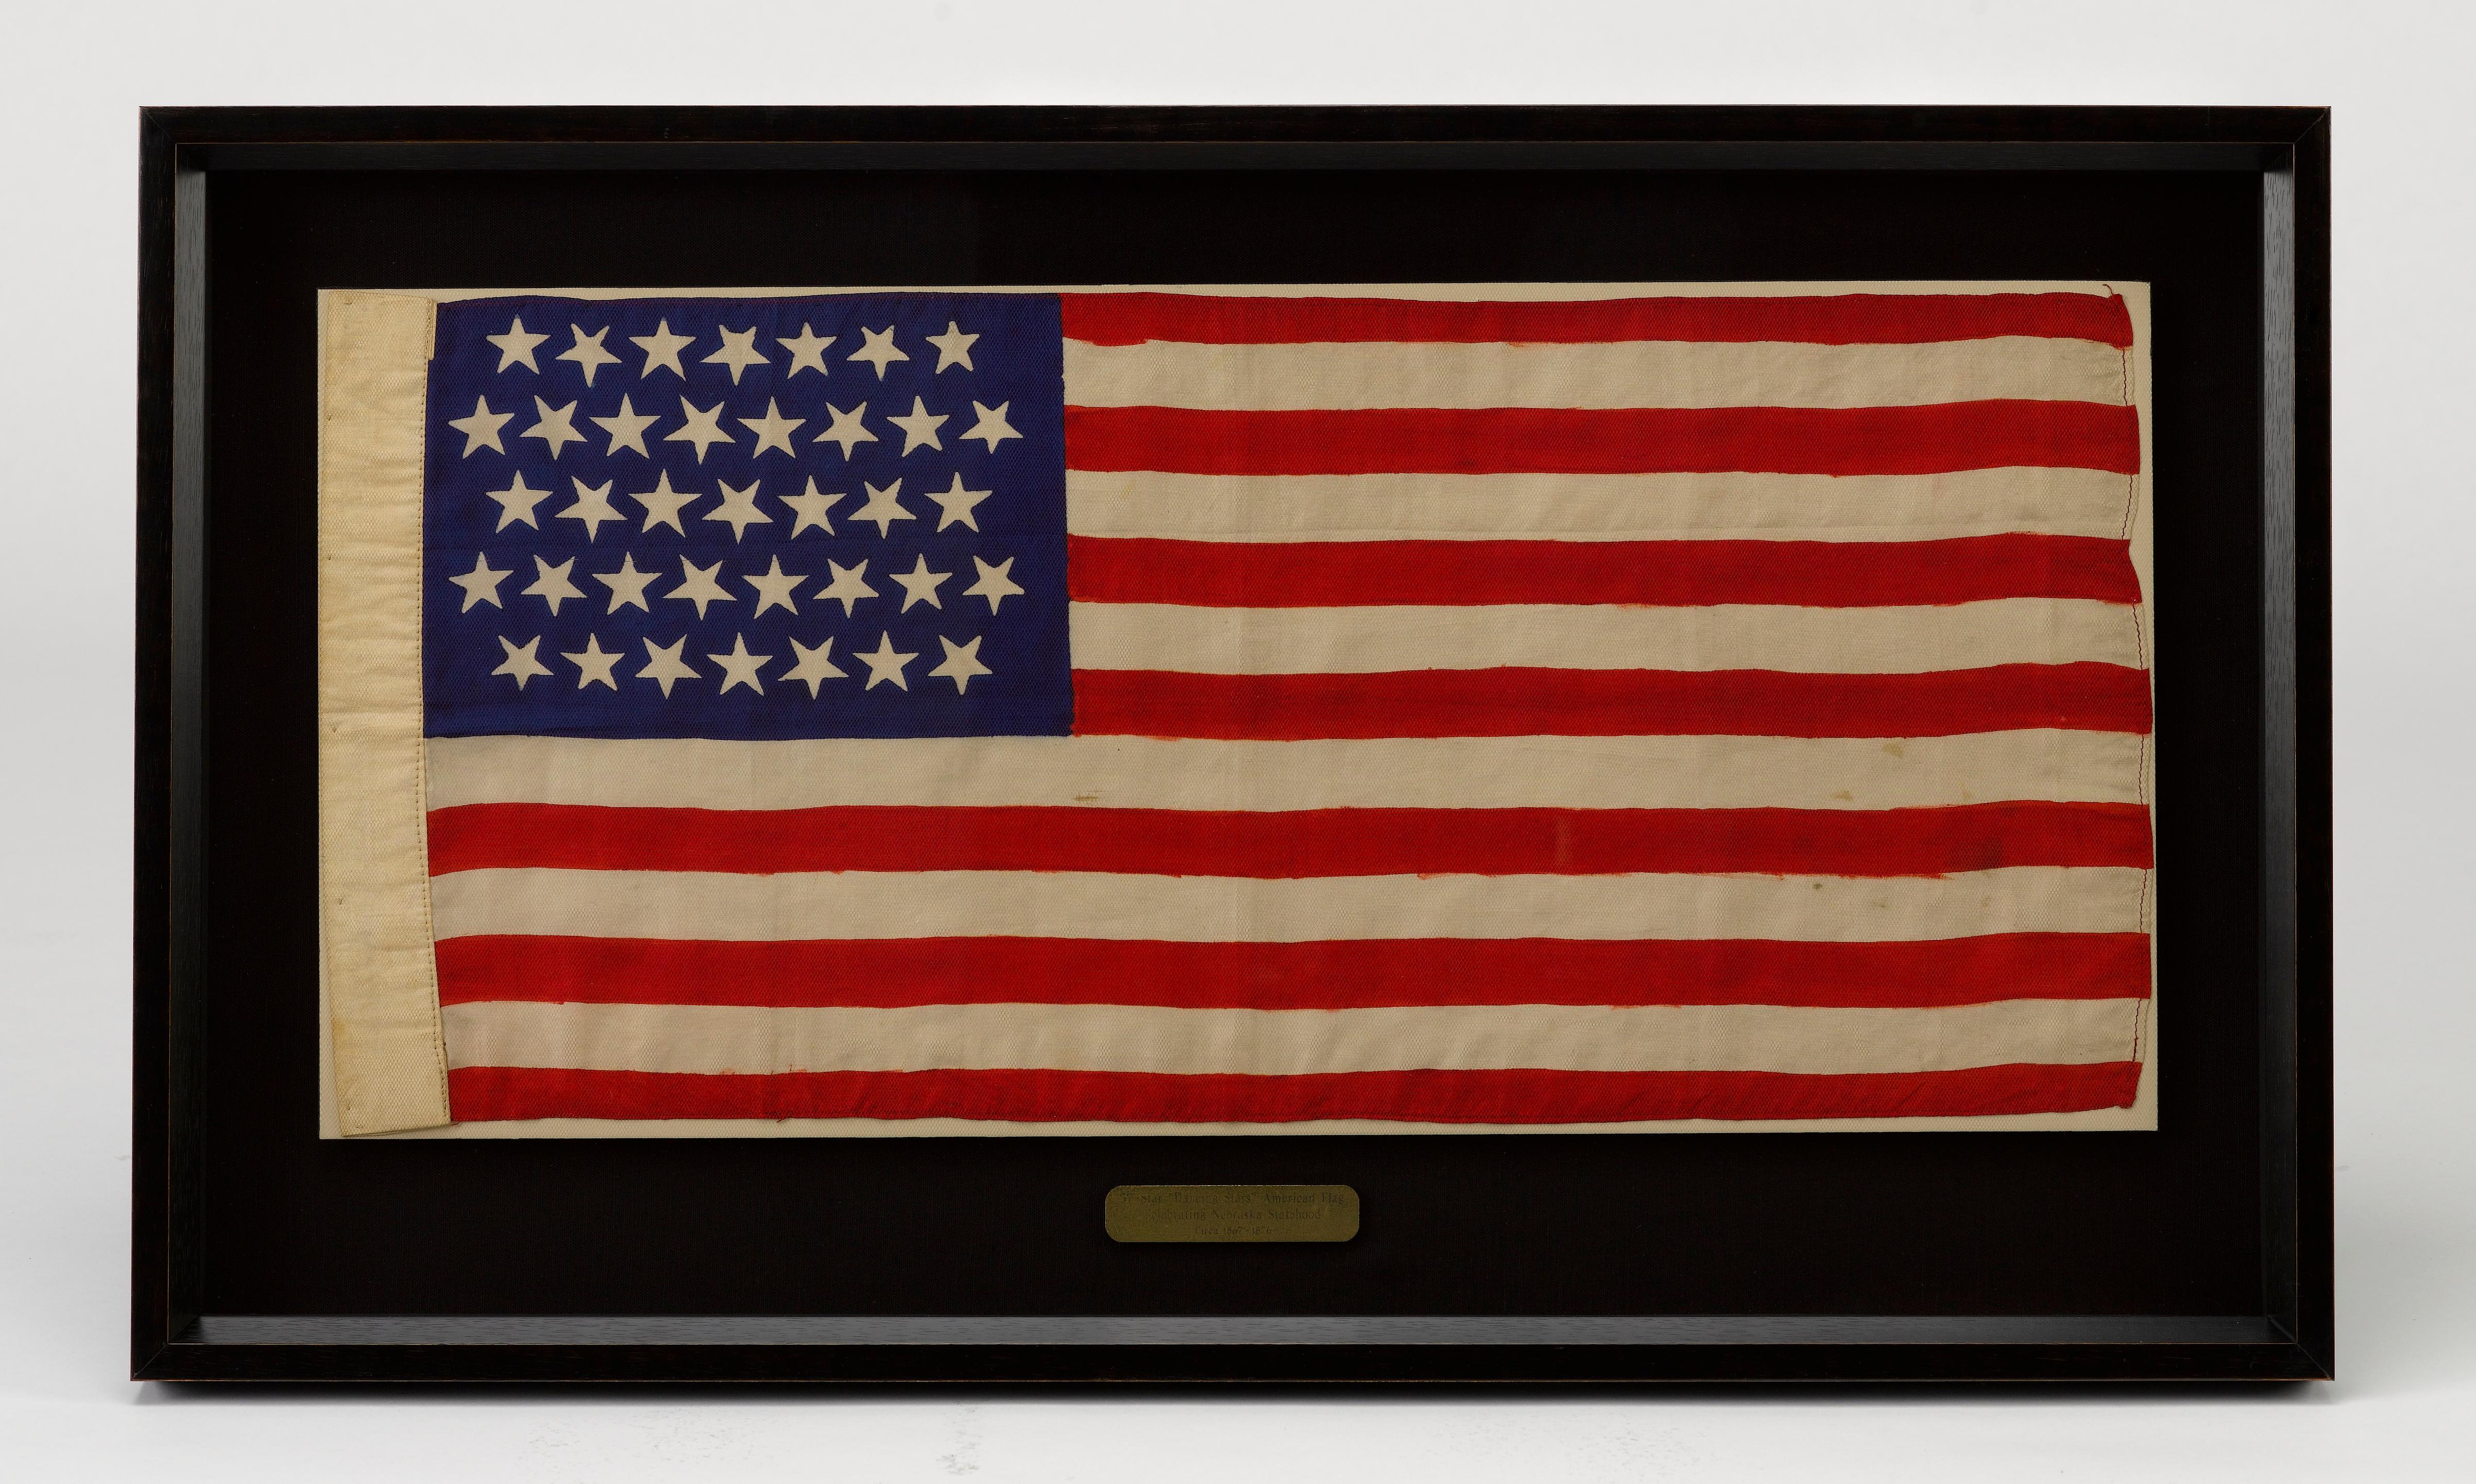 37-Star American Flag with Whimsical star pattern printed on silk, commemorating Nebraska statehood.

Printed American parade flag that features whimsical or 